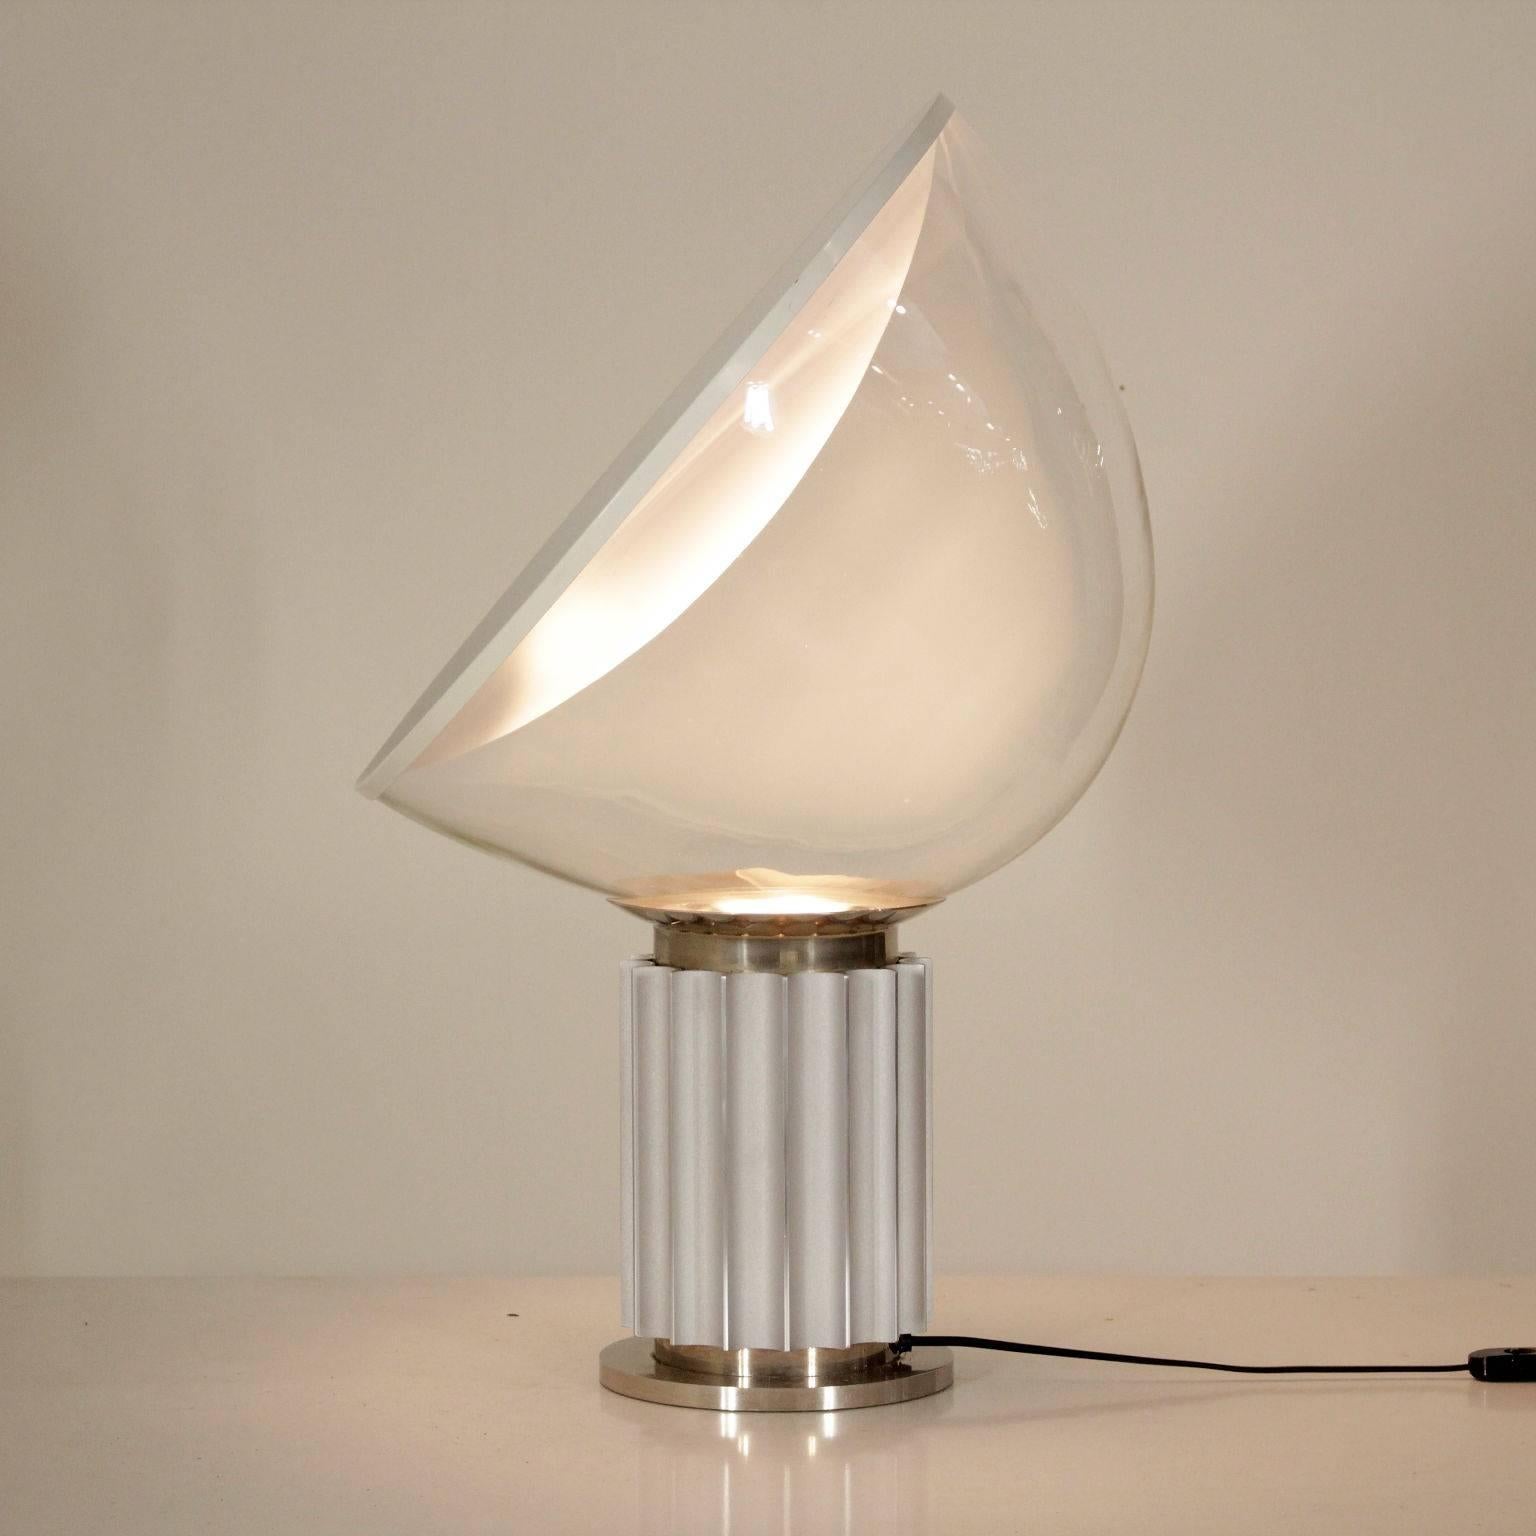 'Taccia' table lamp with indirect lighting designed by Castiglioni brothers for Flos. Metal and aluminium base, glass adjustable diffuser. Manufactured in Italy, 1960s. As Gramigna wrote: ' Taccia lamp, using particular lighting techniques for the